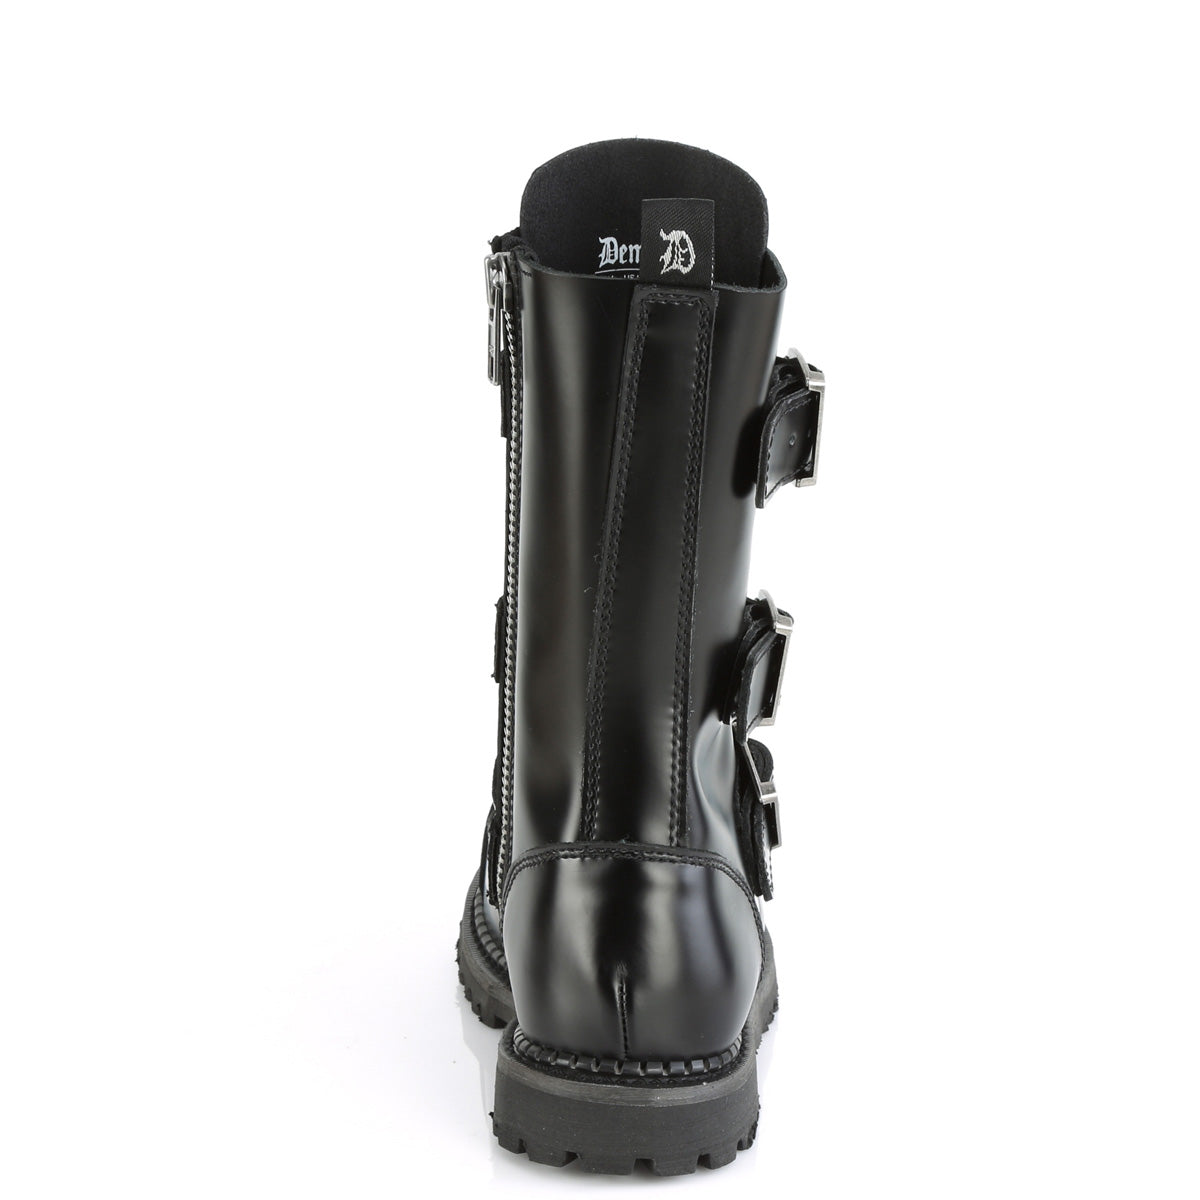 Riot Combat Police Leather Boots (Unisex)